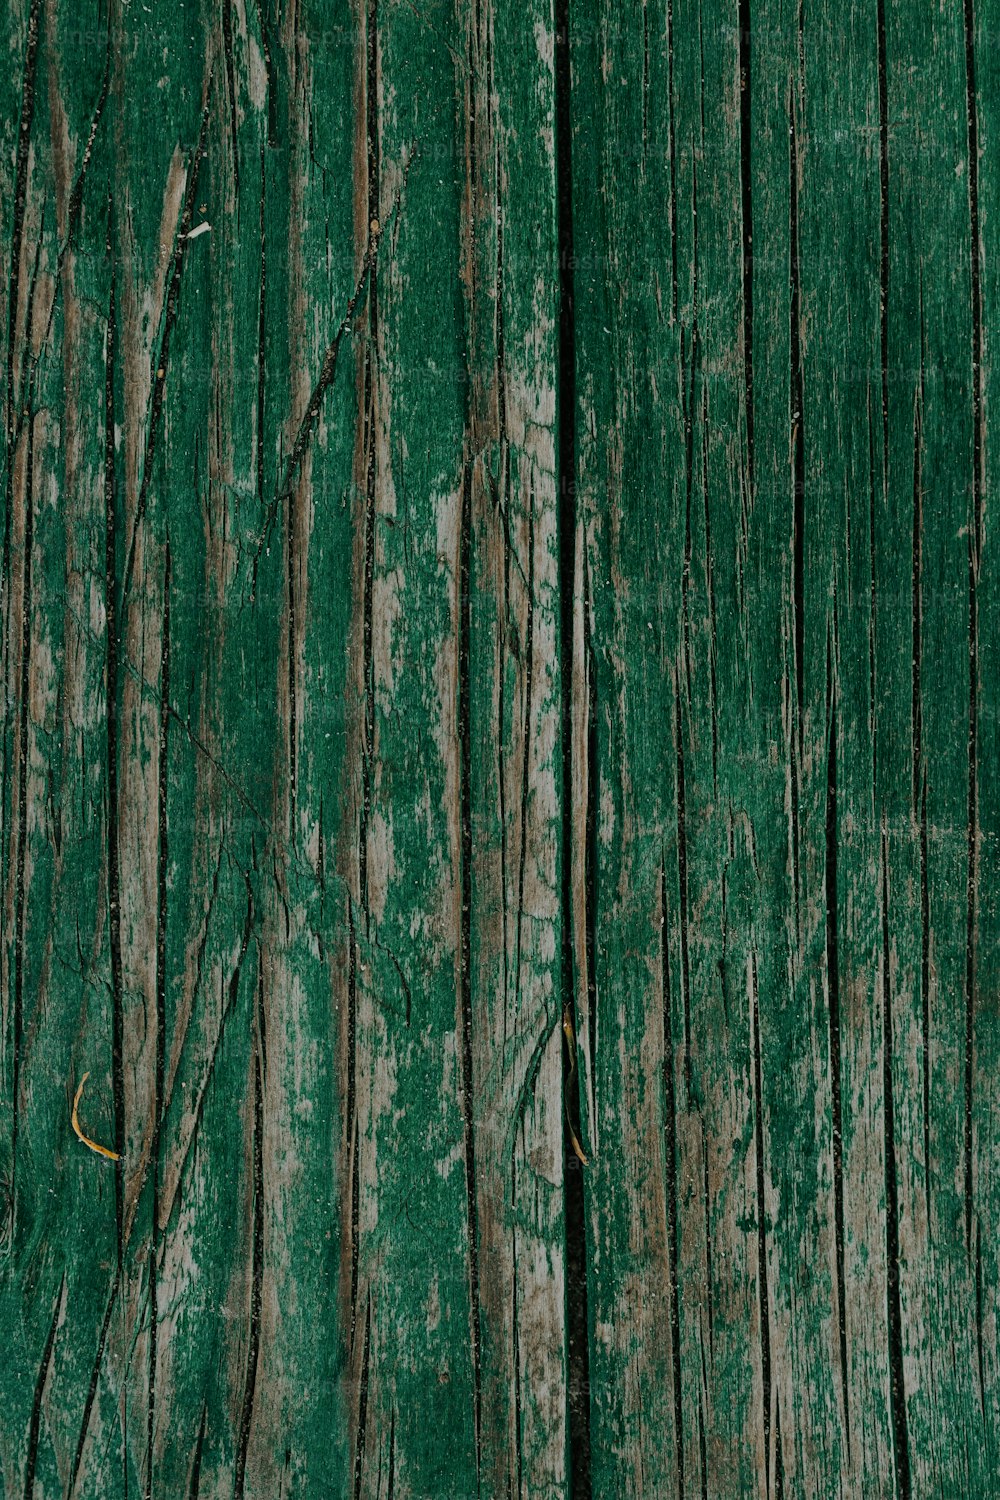 a close up of a green wooden surface